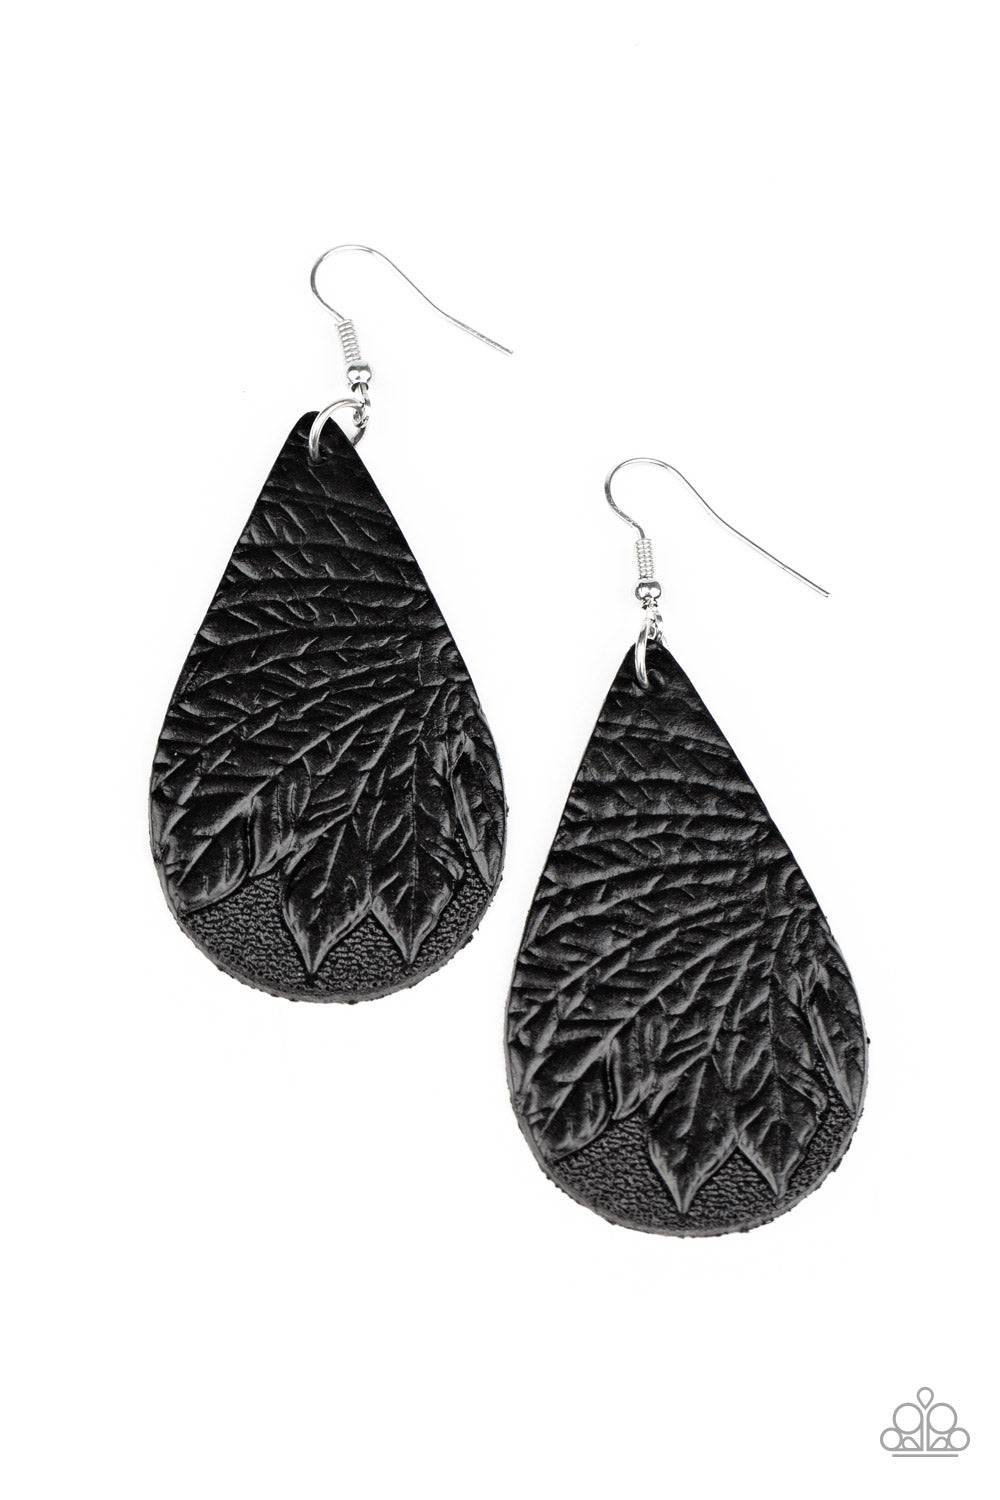 Everyone Remain PALM! Black Leather Earring - Paparazzi Accessories